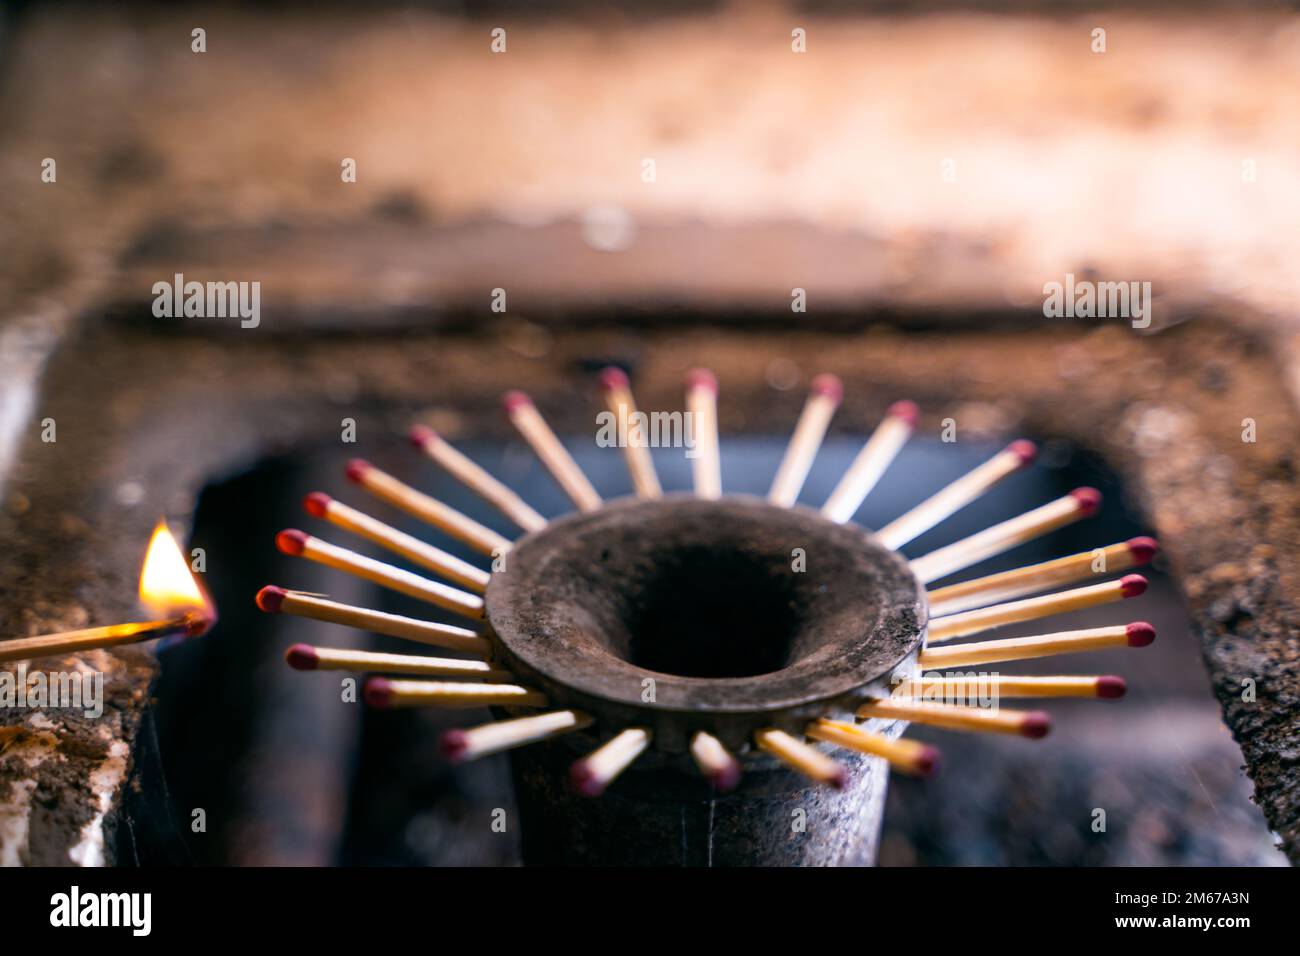 Limited resource for heating and cooking. Wooden matches instead of fire in the burner of a gas stove close-up. Low standard of living, survival in po Stock Photo